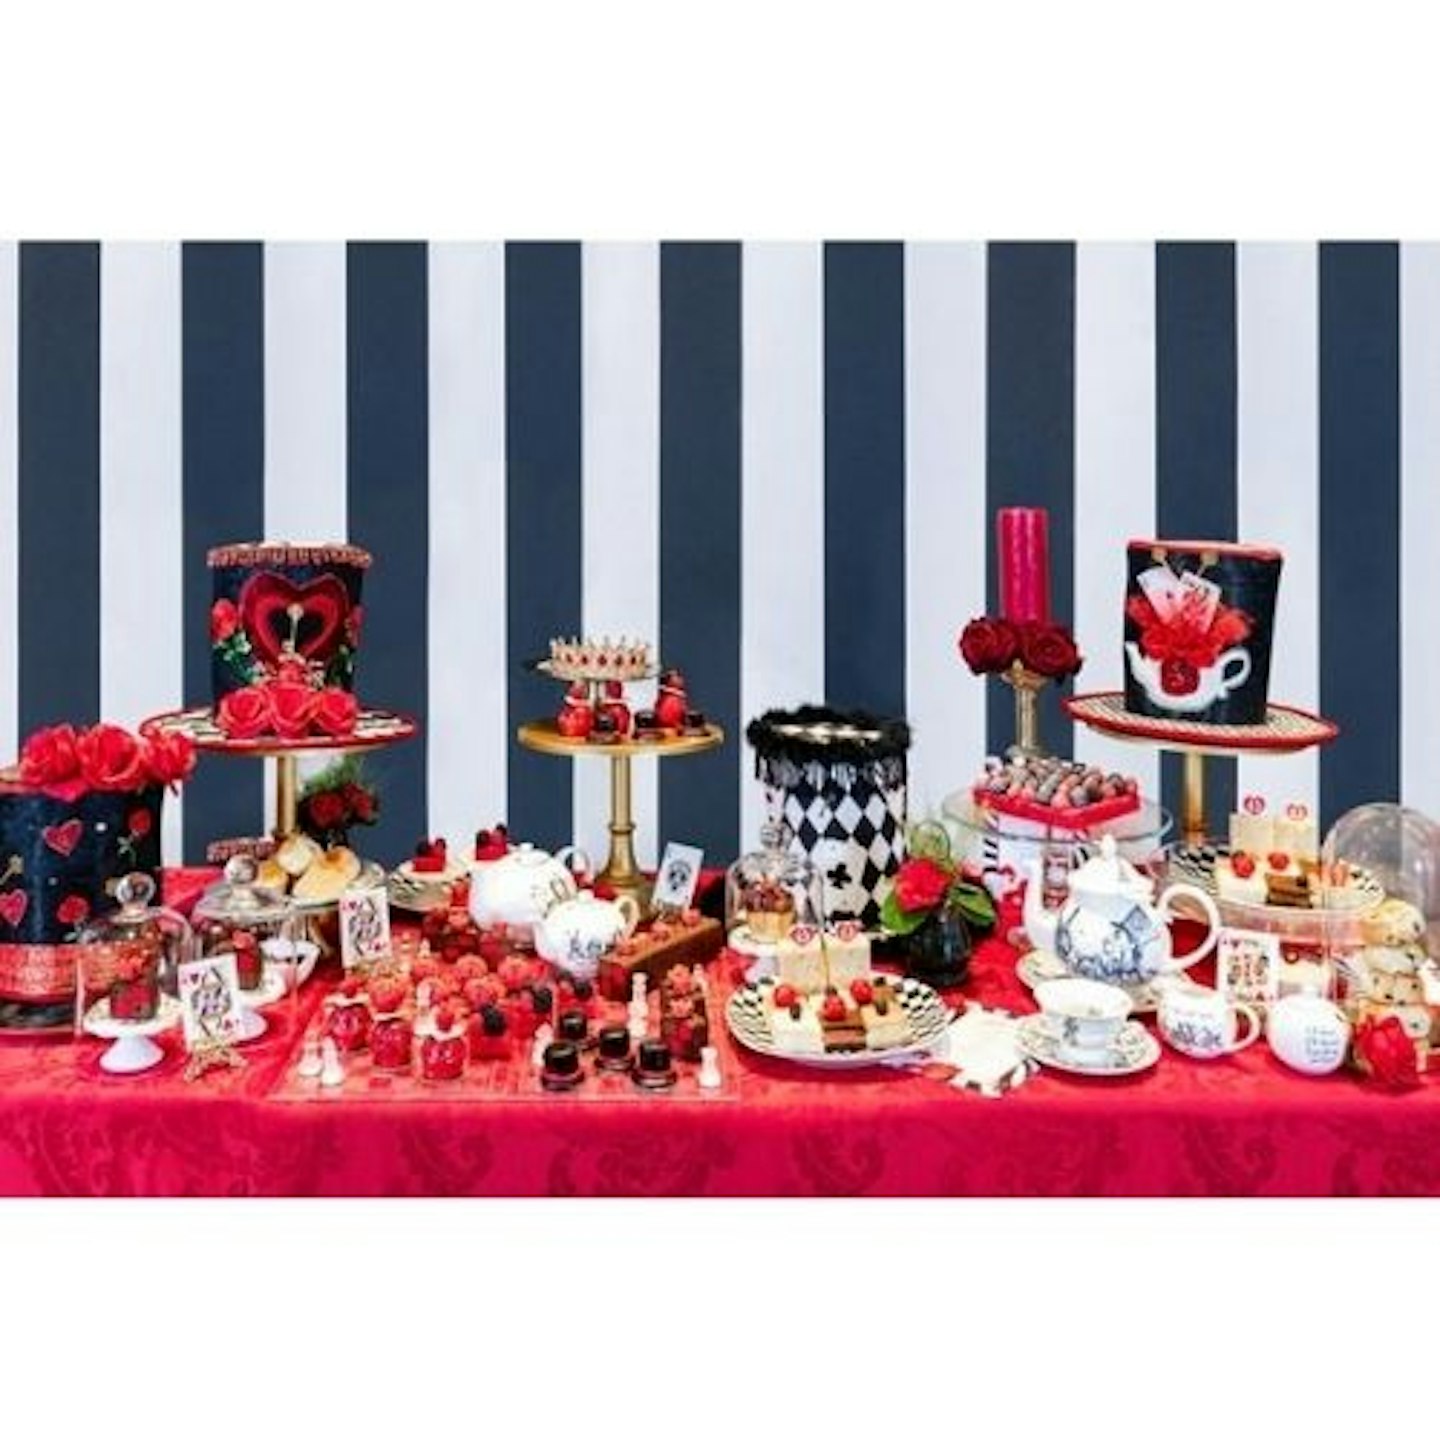 Alice's Queen of Hearts Afternoon Tea for Two